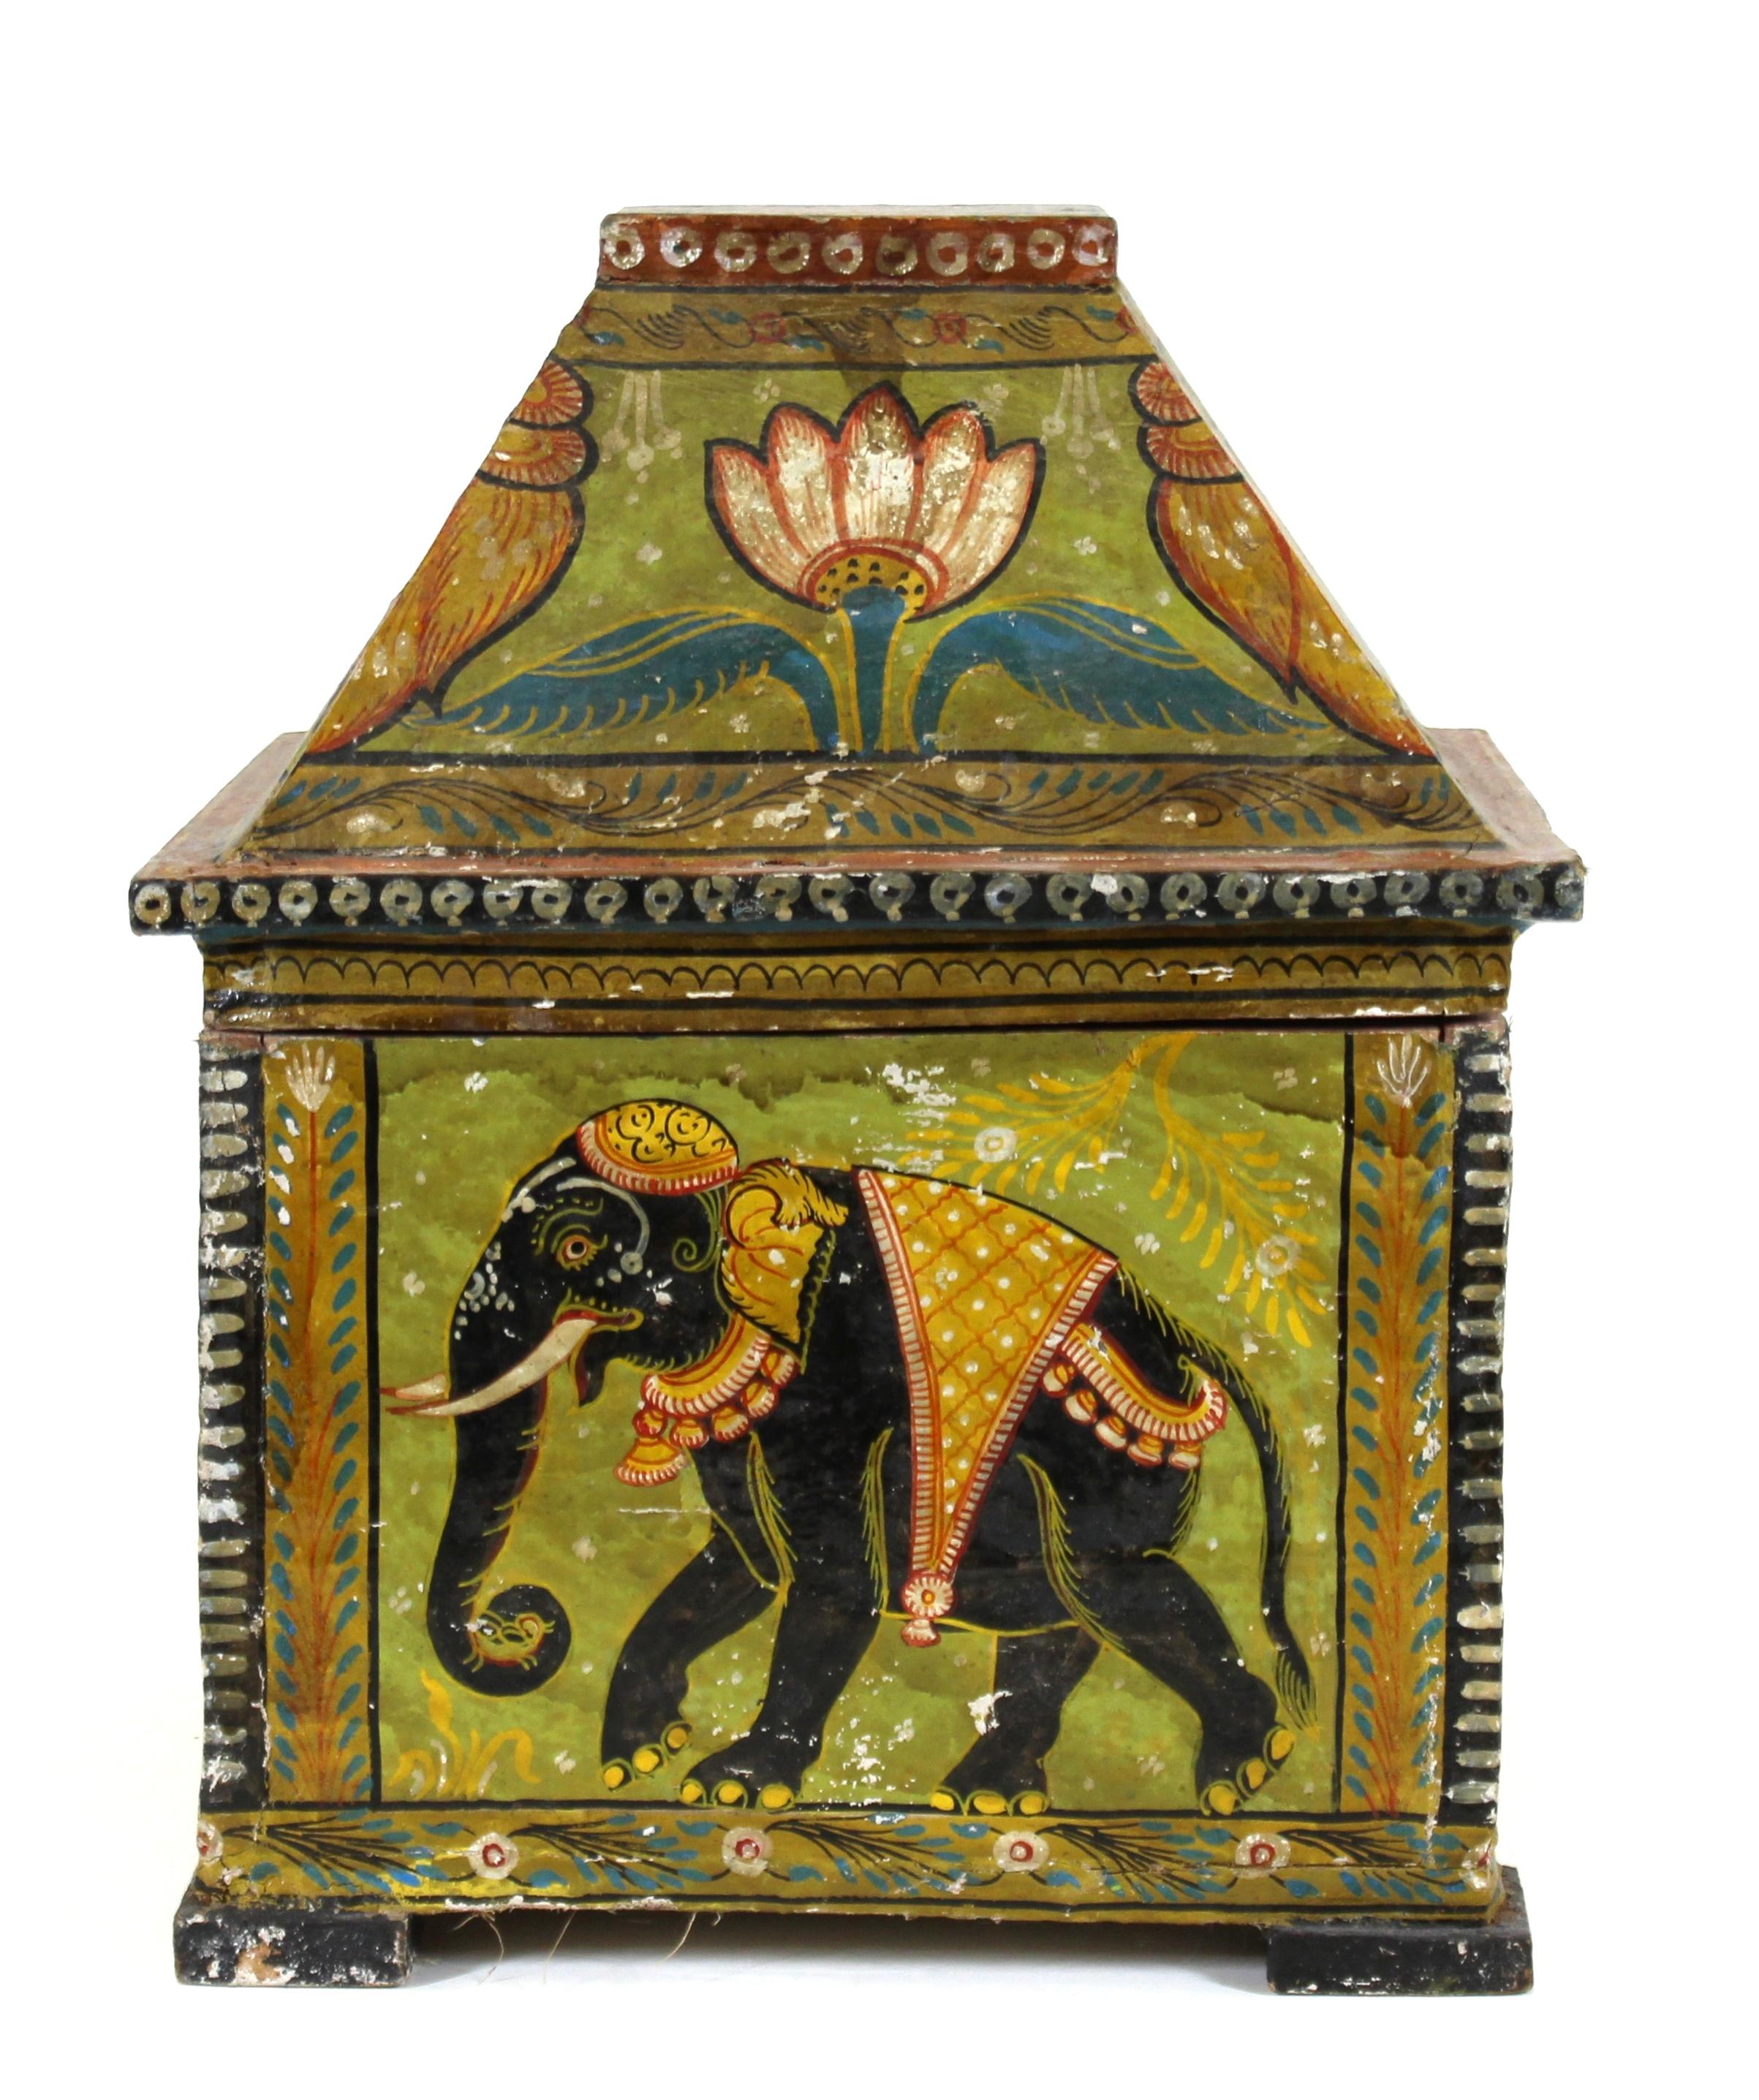 Anglo-Indian Indian Wood Box with Painted Animal Scenes